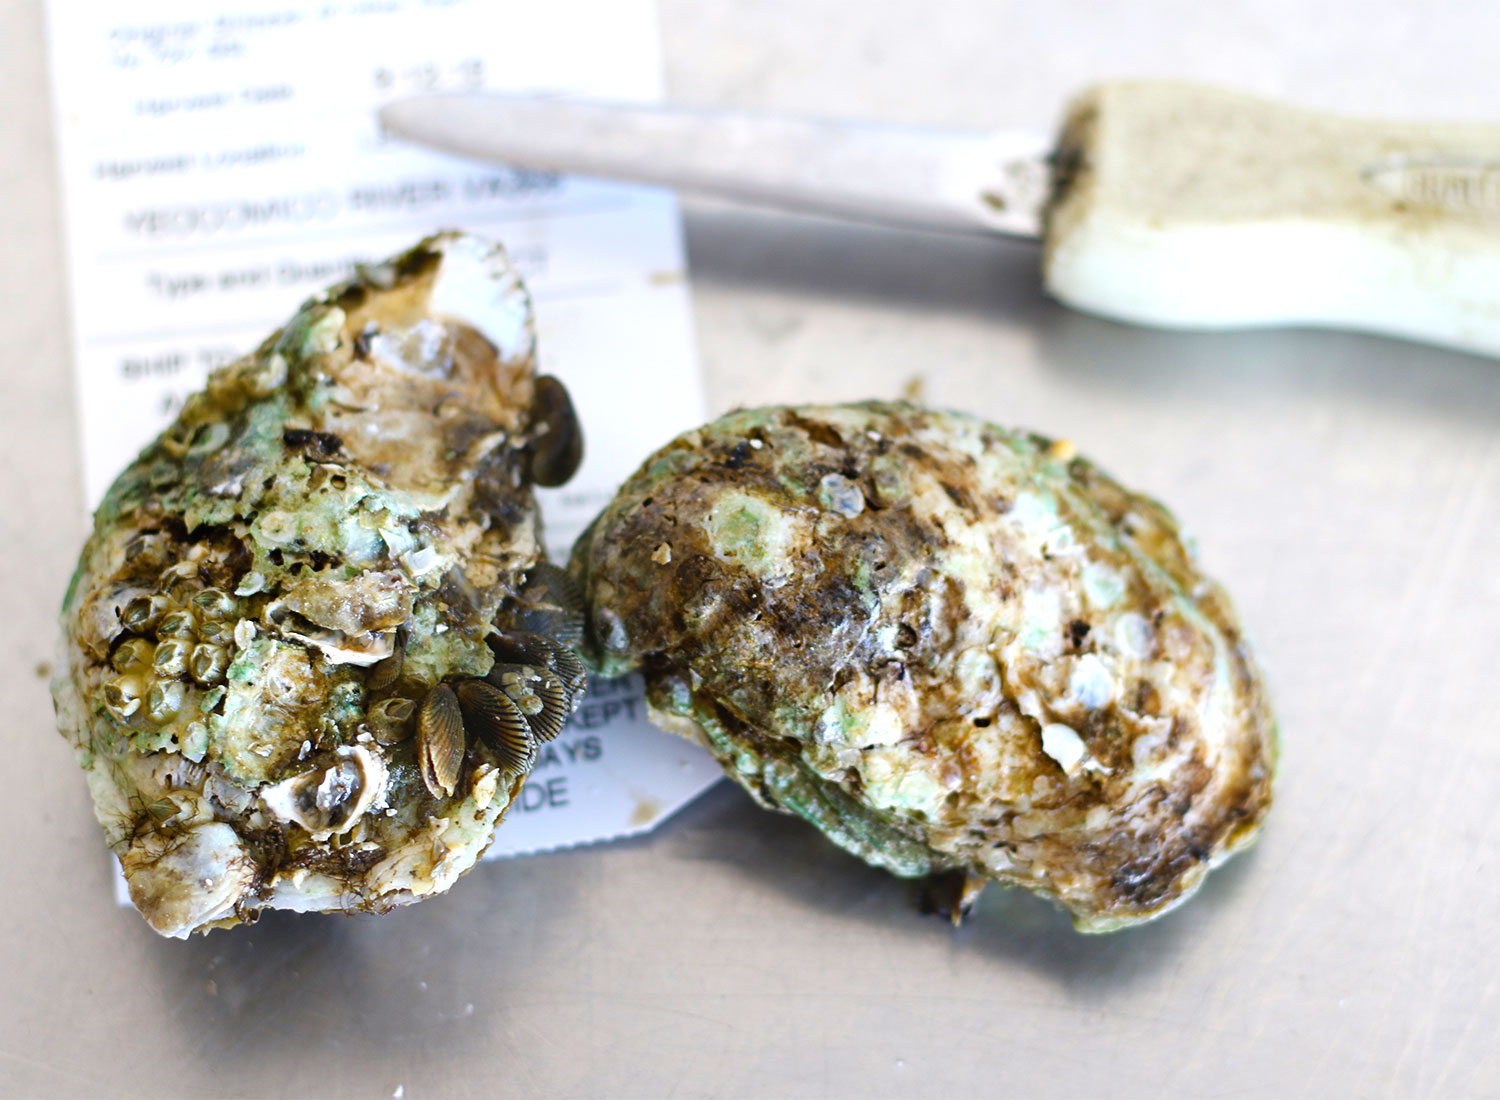 Oysters 101: Oysters with a shucking knife at Santa Rosa Seafood. Heather Irwin/PD